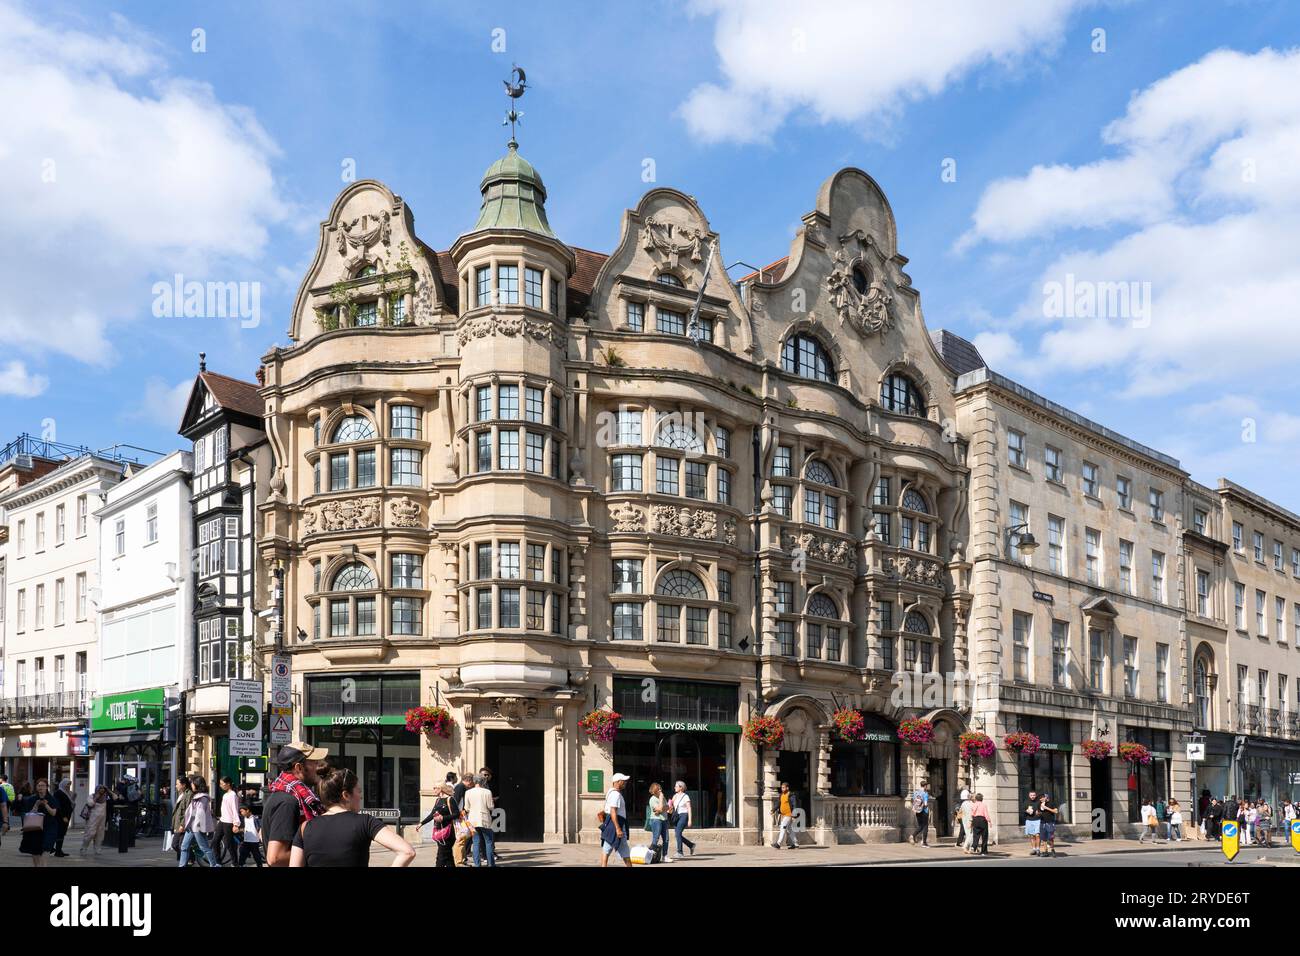 The Grade II listed decorated facade of 1–3 High Street and 1 Cornmarket - currently occupied by Lloyds Bank. Central Oxford, England Stock Photo